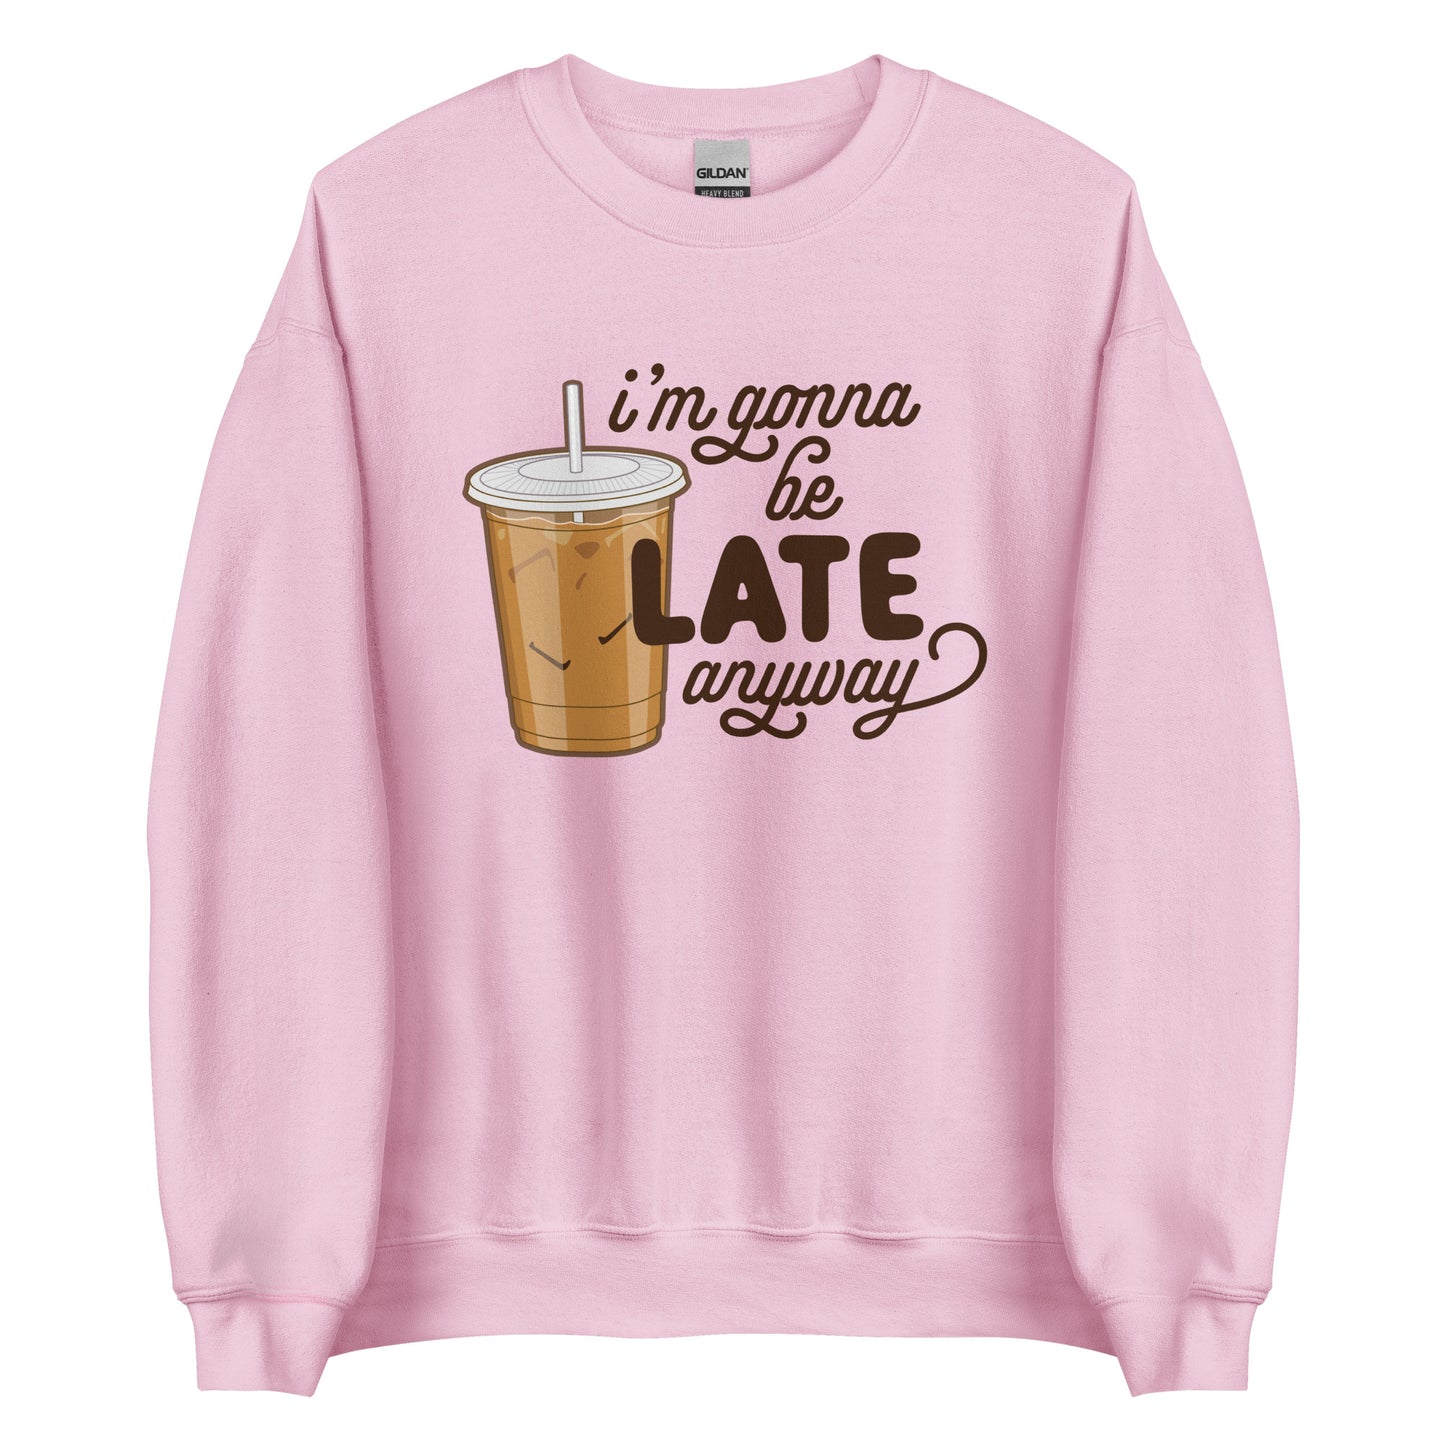 A light pink crewneck sweatshirt featuring an illustration of iced coffee. Text next to the coffee reads "I'm gonna be LATE anyway".